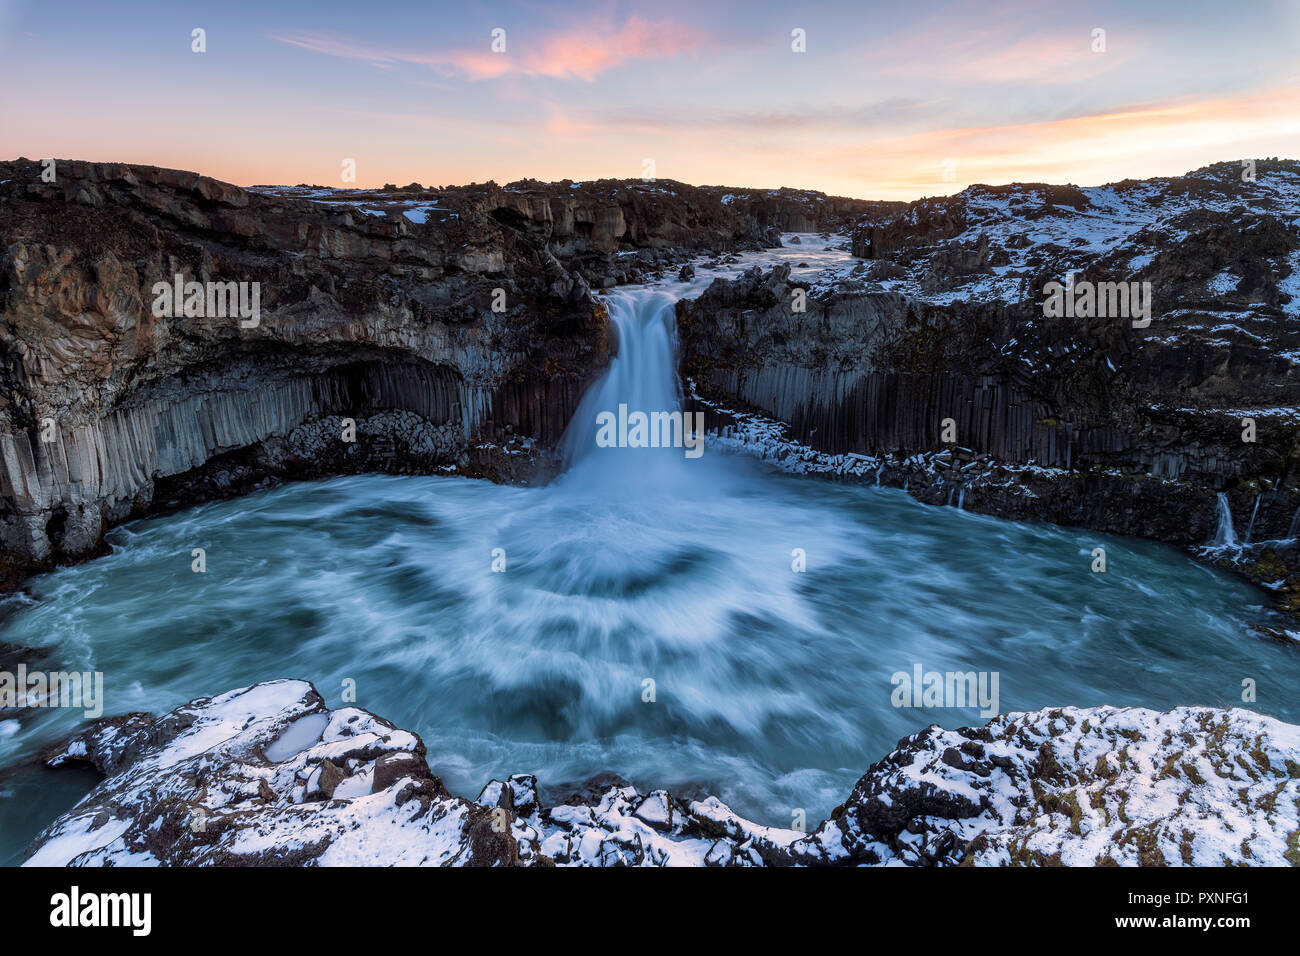 Sprengisandur, Iceland - The Aldeyjarfoss waterfall is situated in the north of Iceland at the northern part of the Sprengisandur Highland Road which  Stock Photo